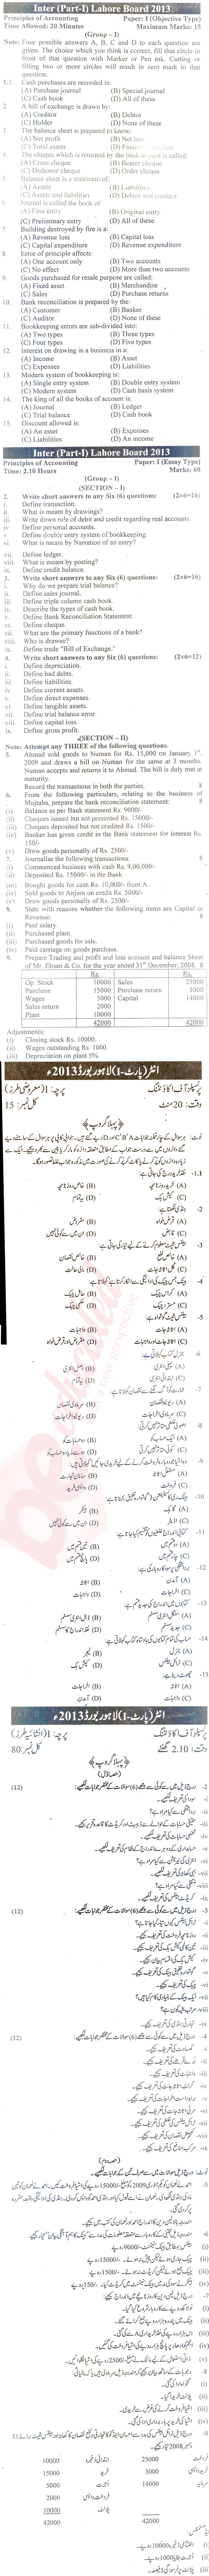 Principles of Accounting ICOM Part 1 Past Paper Group 1 BISE Lahore 2013